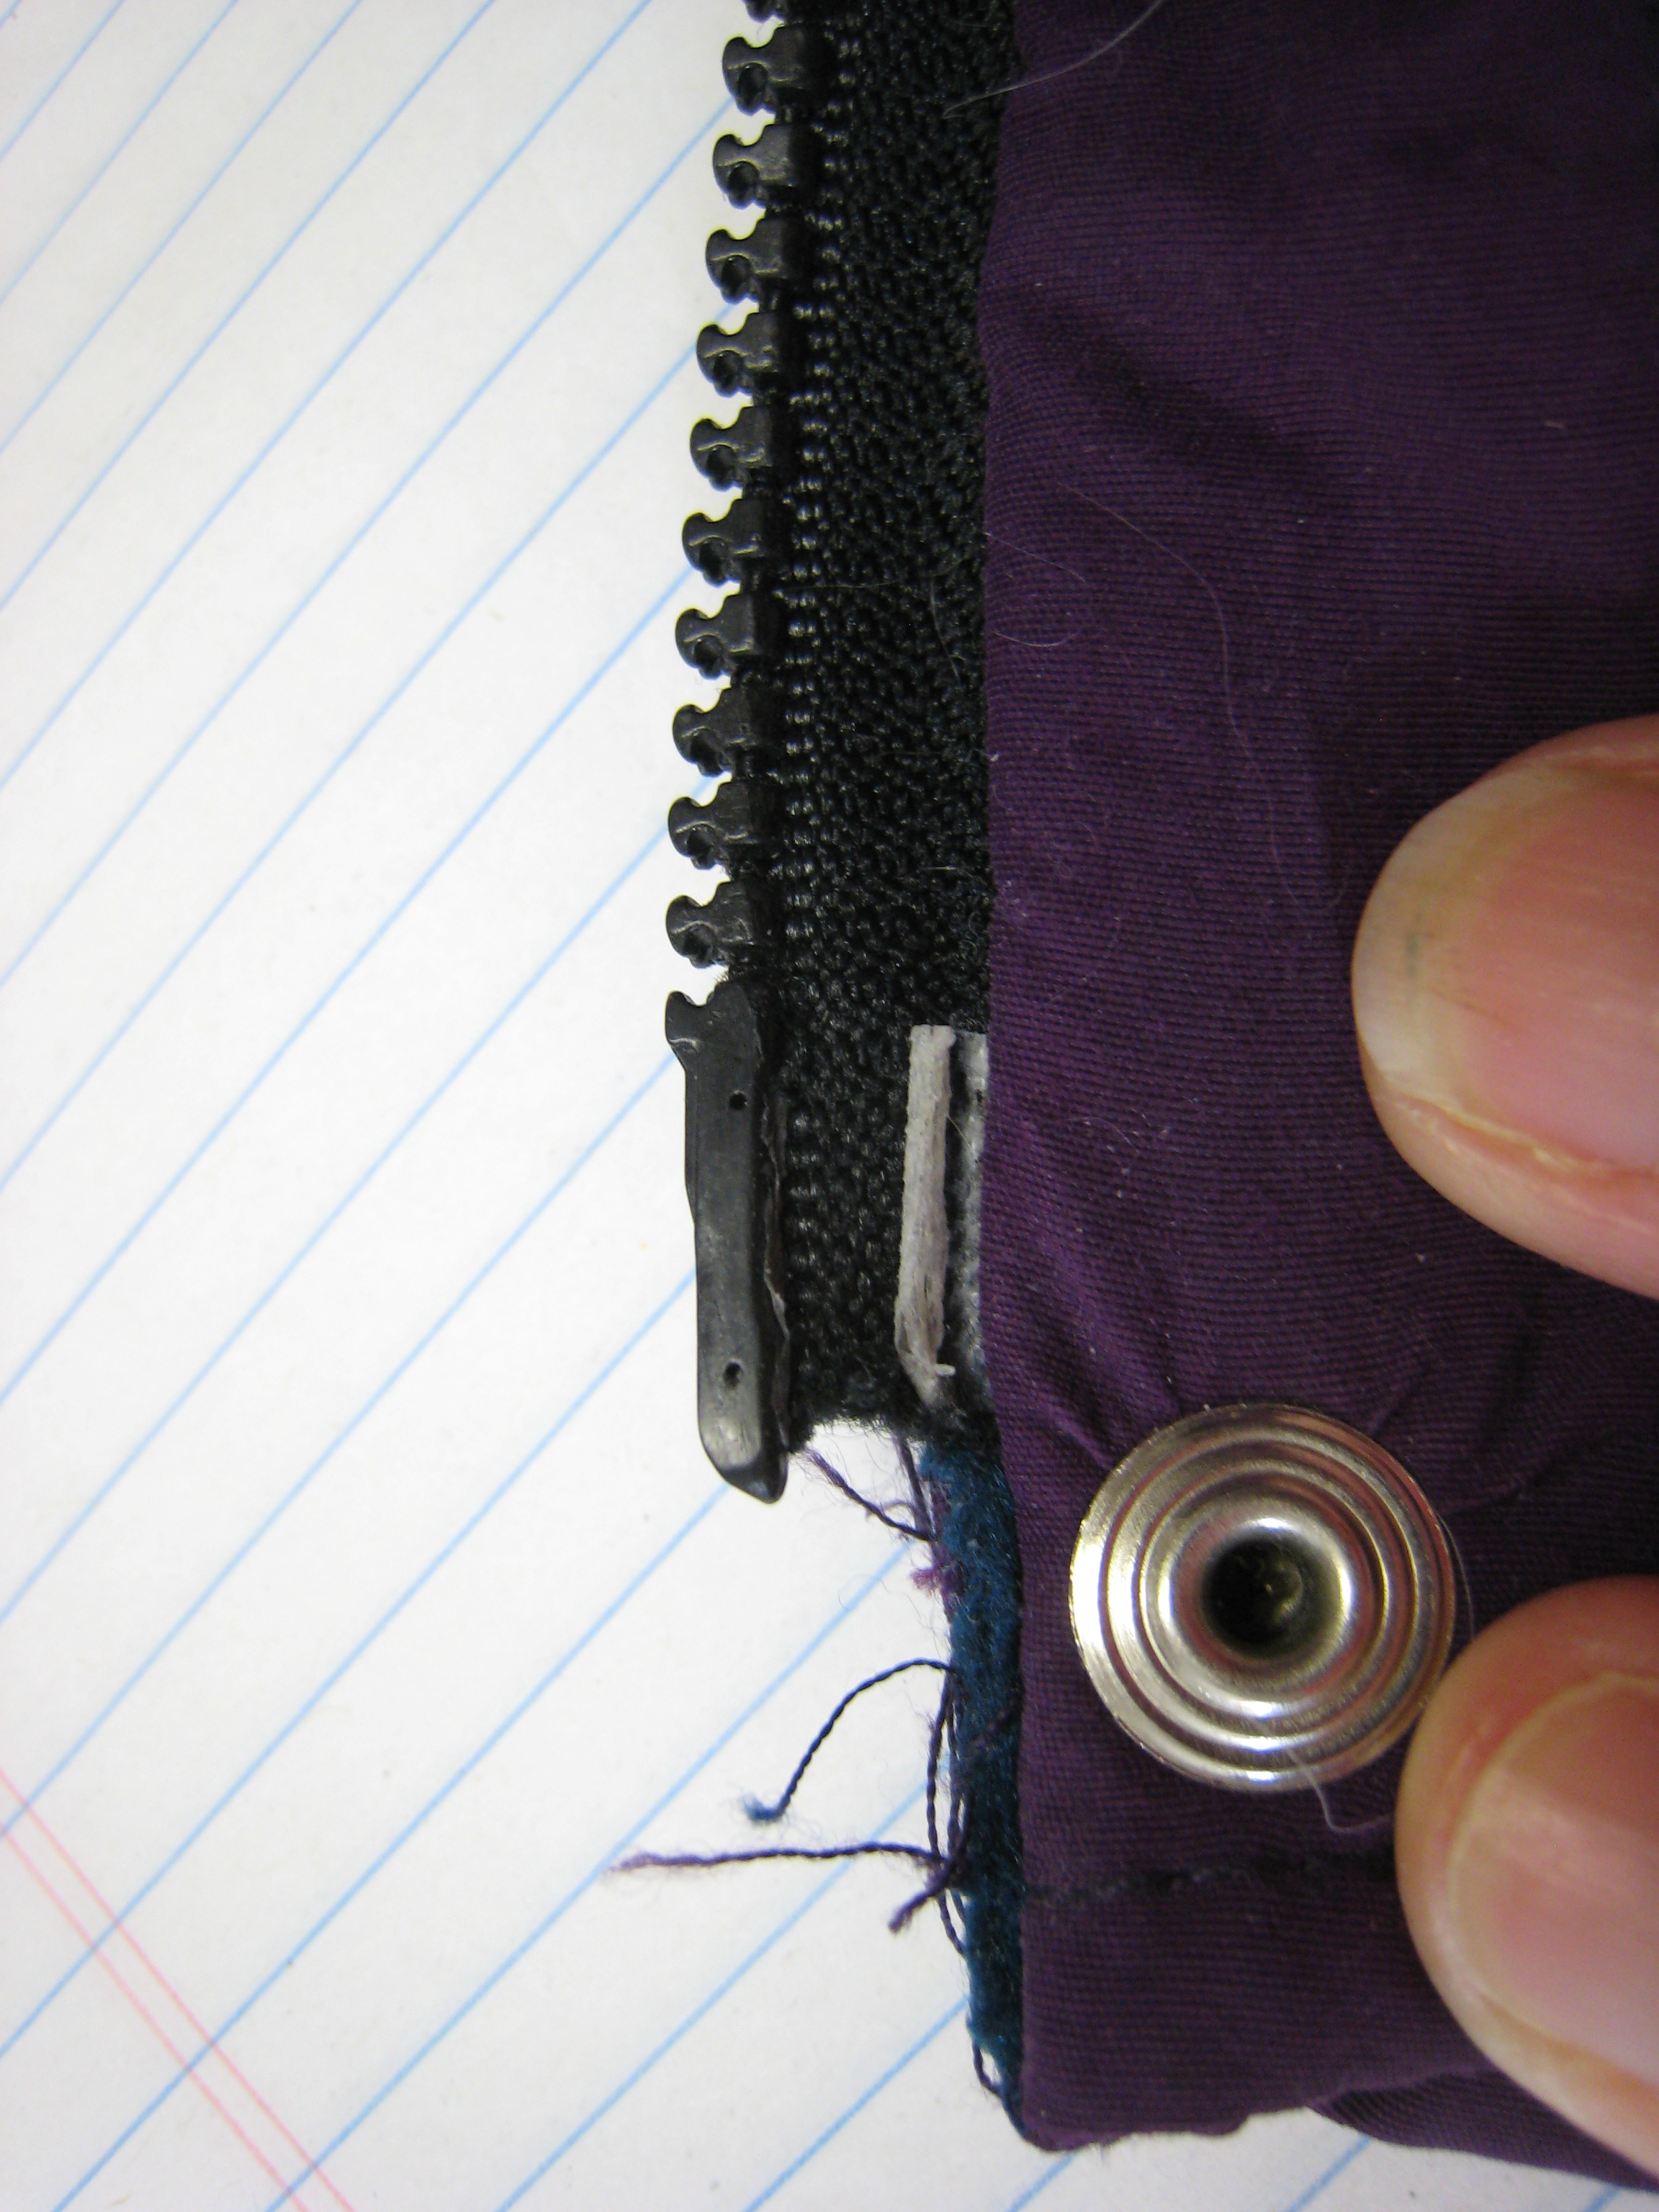 Where could I find a replacement for the end of that zipper in order to fix  the coat? : r/howto